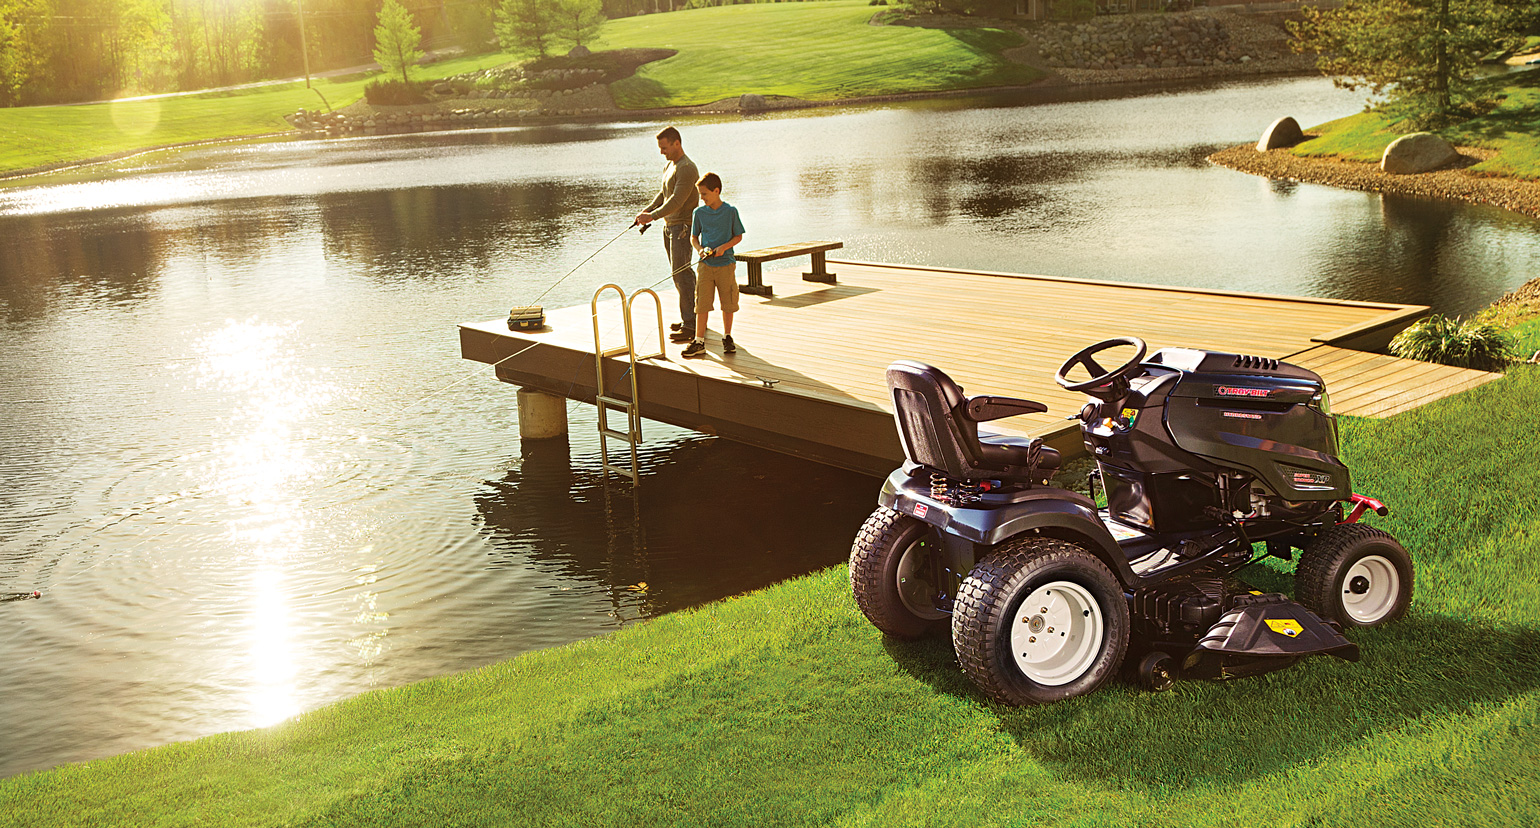 man on pier and riding lawn mower